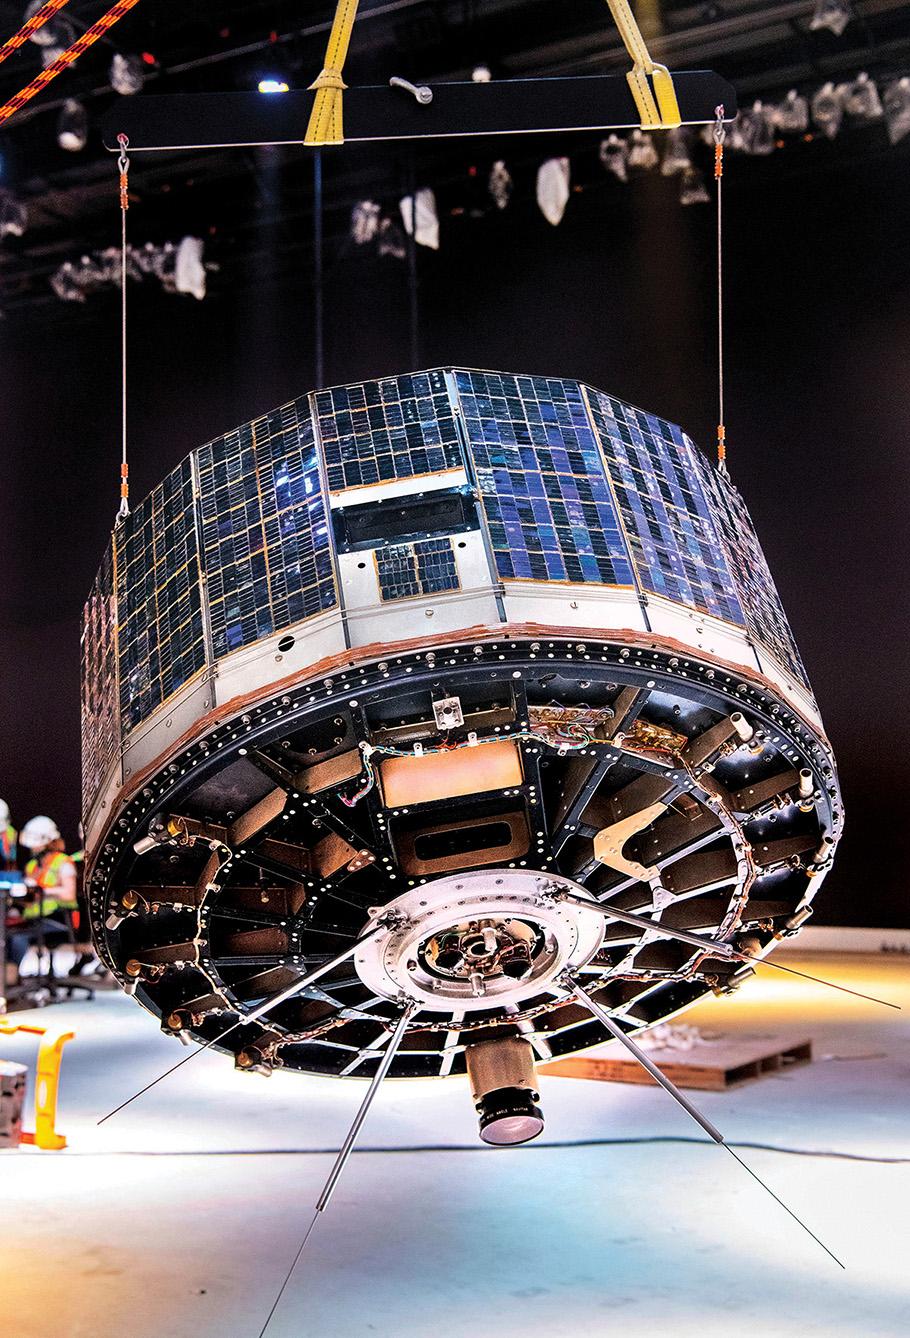 Satellite lifted by two wires attached to crane in gallery under construction.